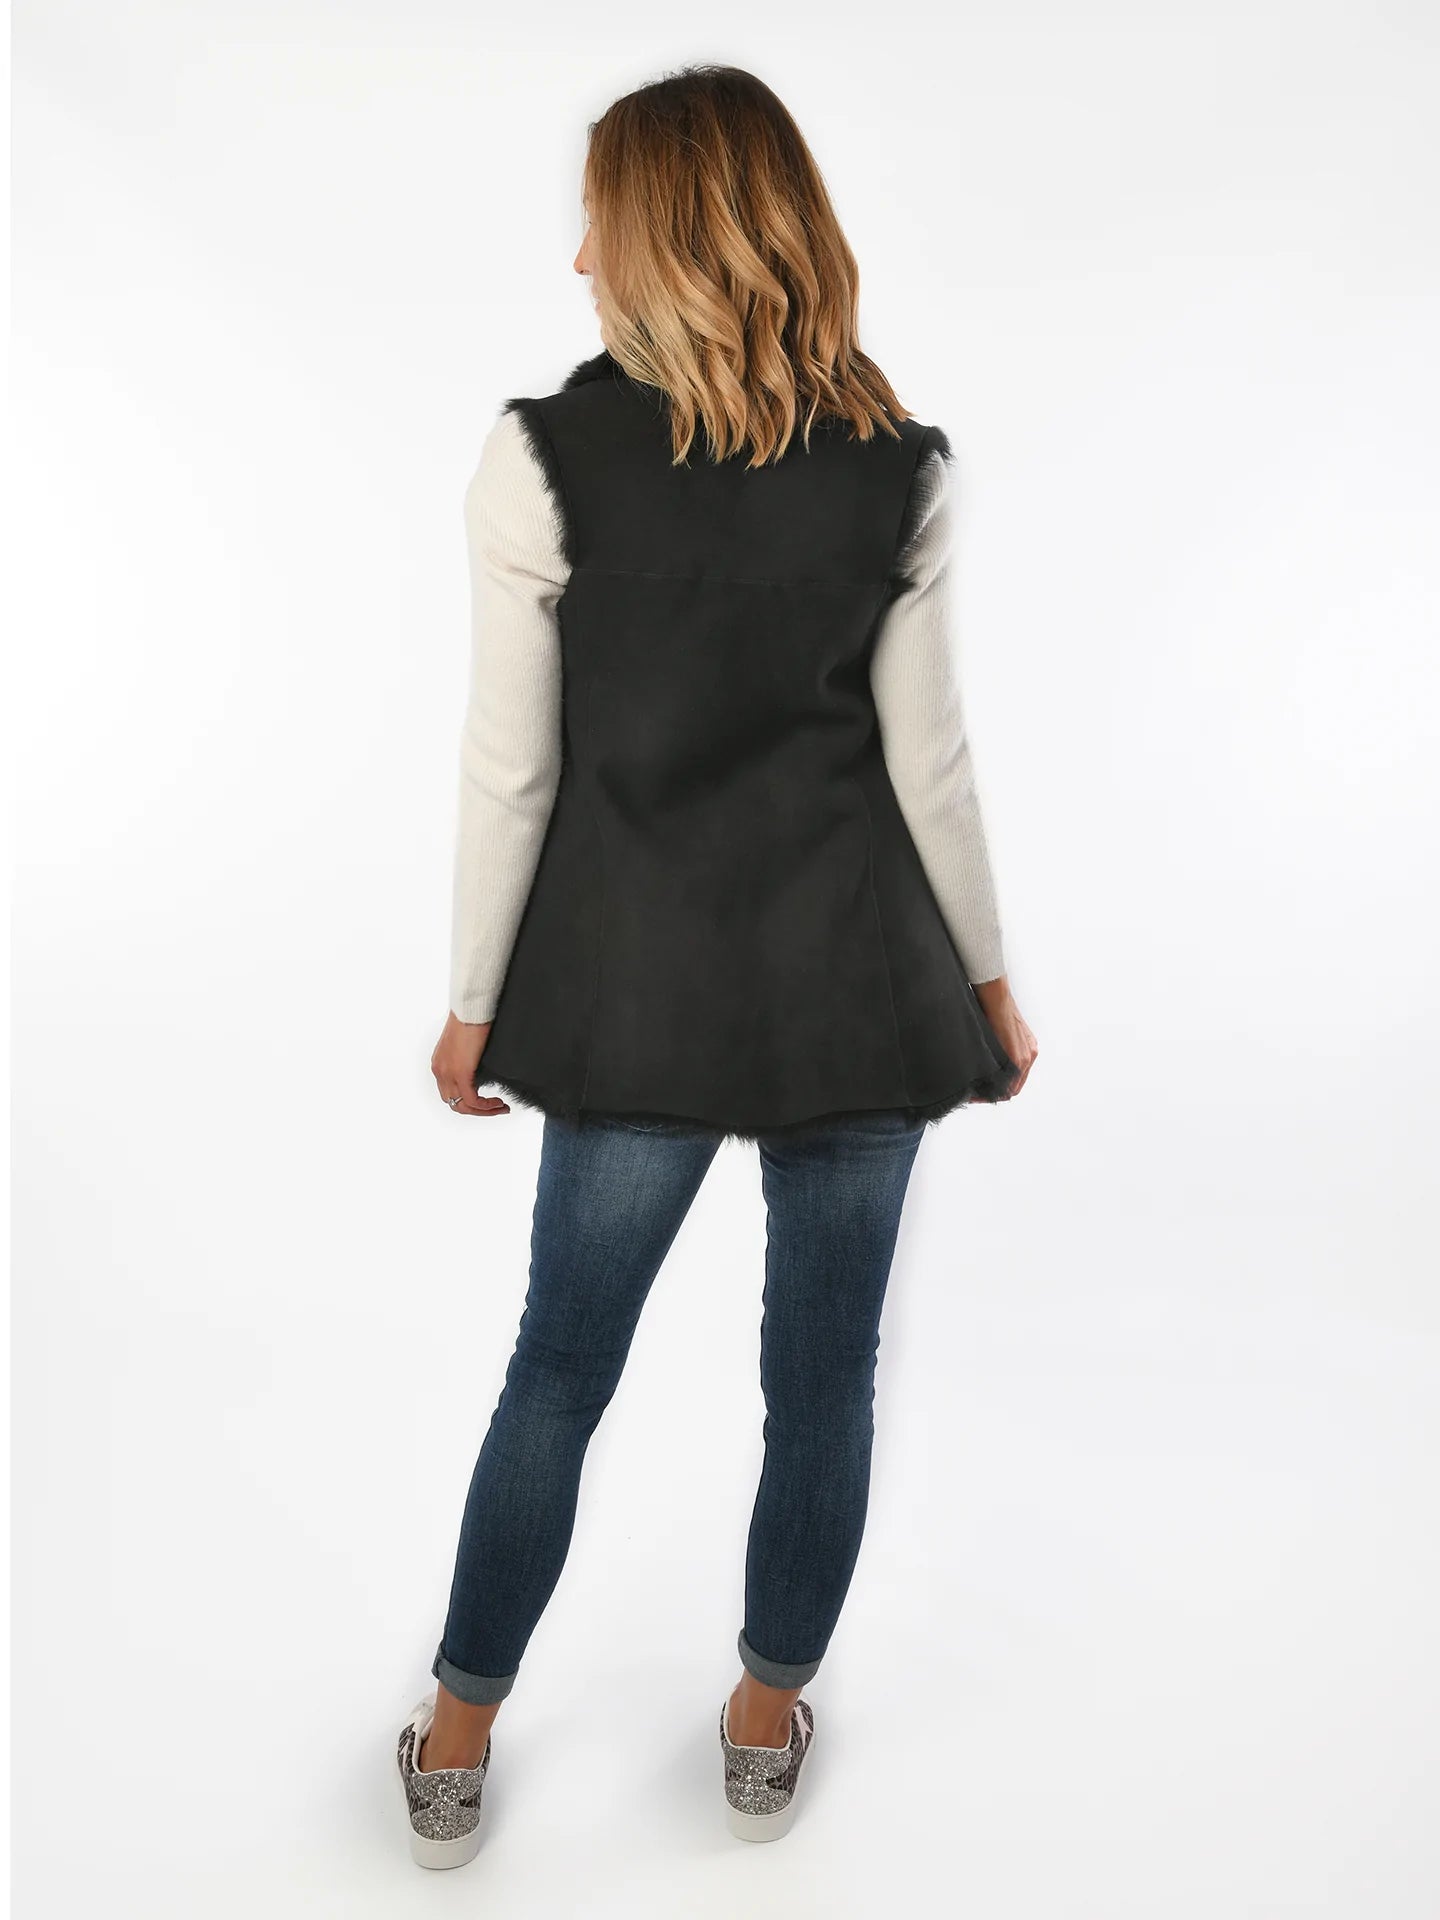 Women's Black Toscana Shearling Leather Sheepskin Gilet for sale - Woodcock and Cavendish